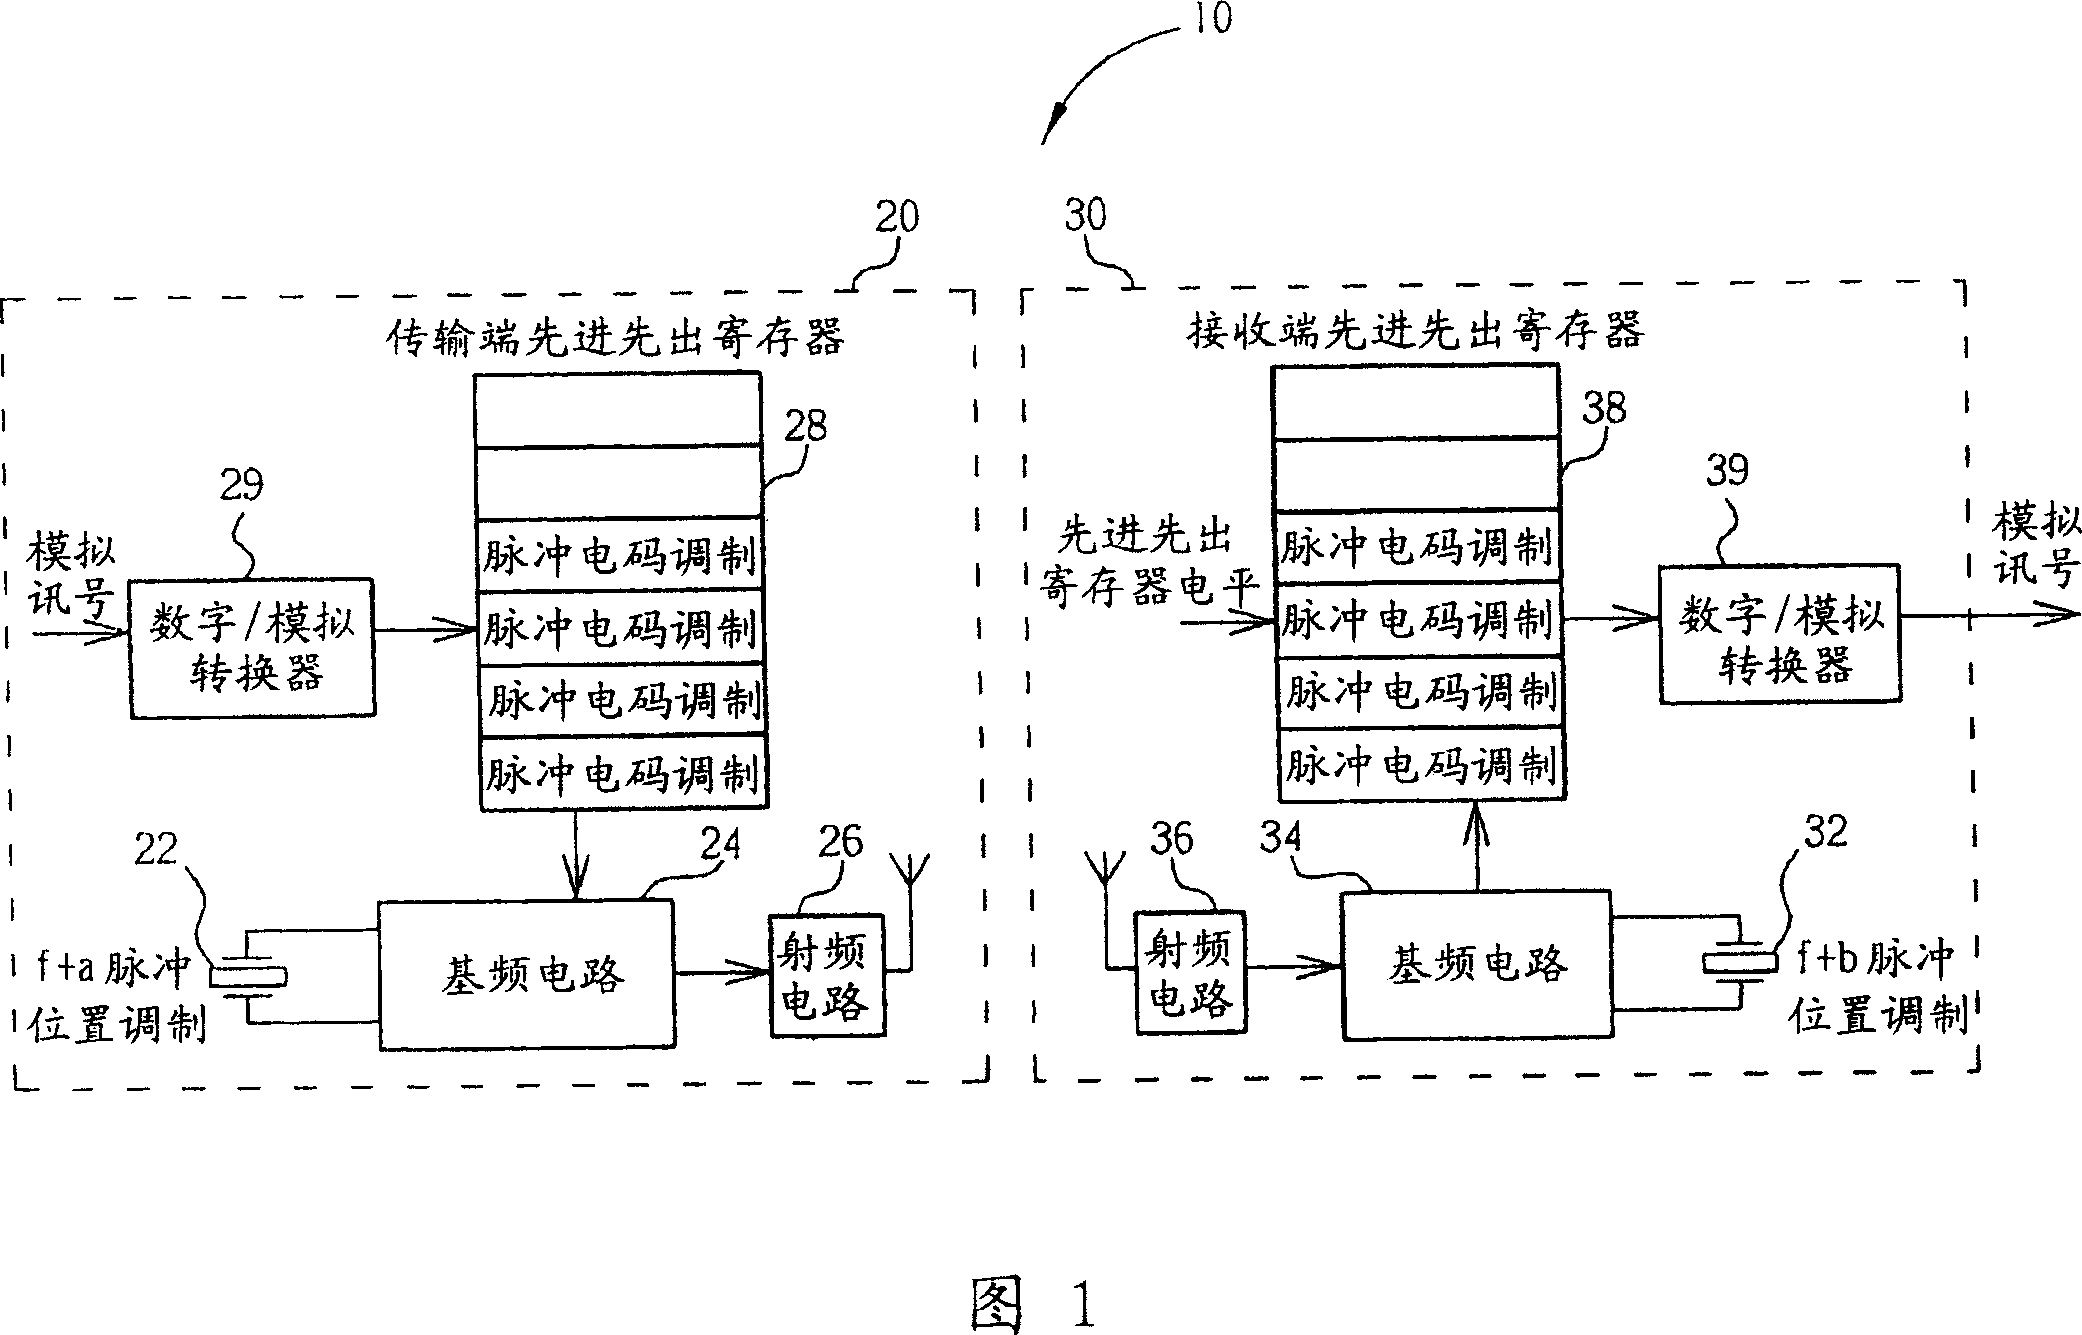 Method of reducing clock differential in a data processing system